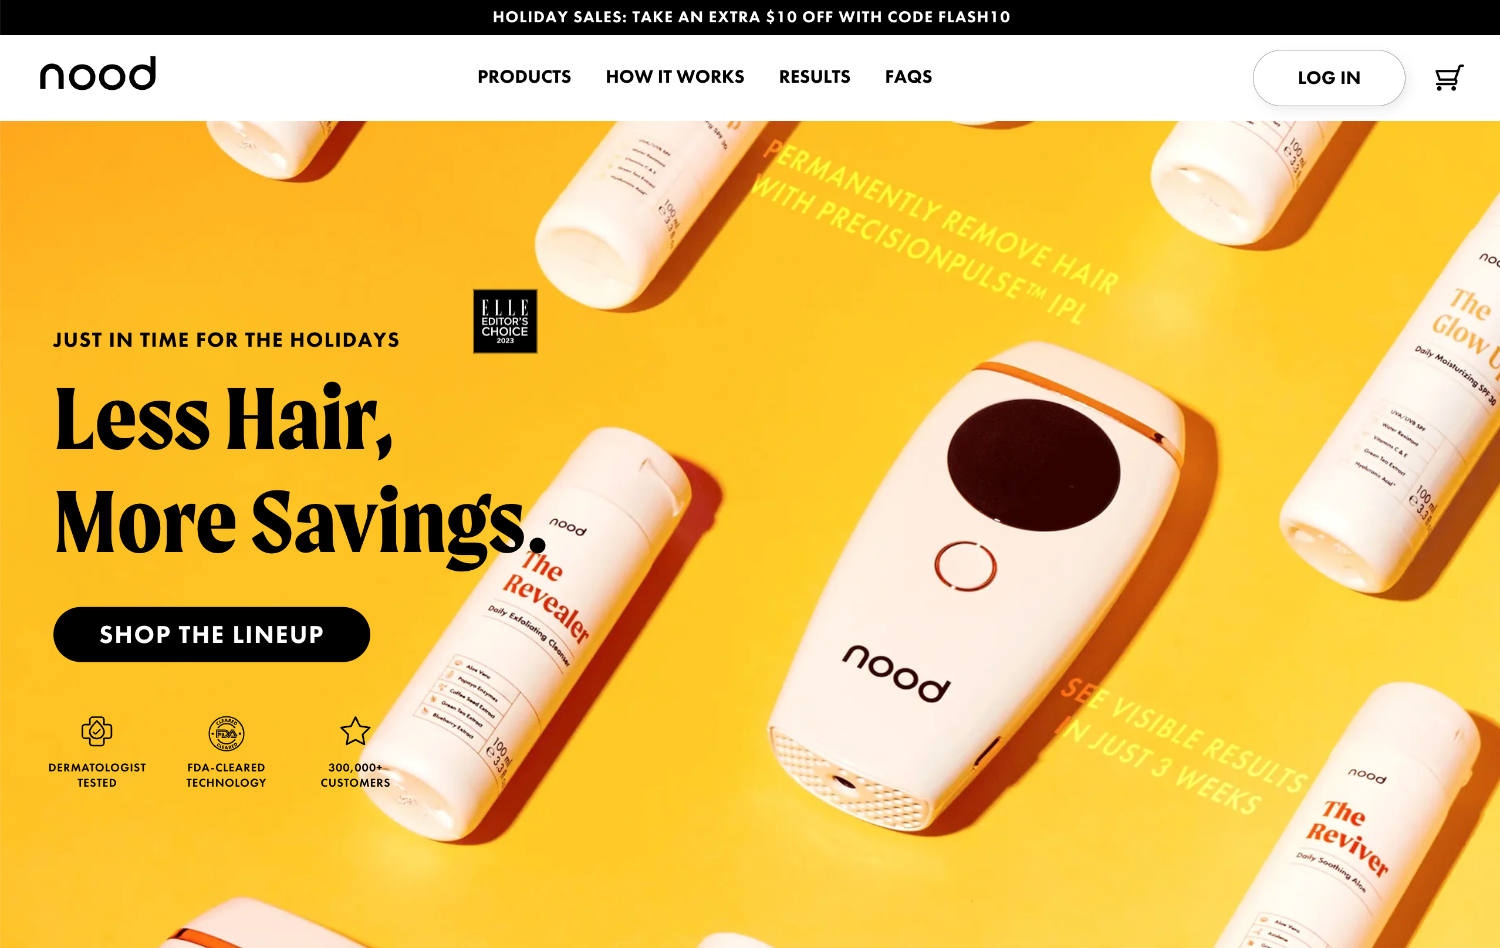 Ecommerce website page for brand Nood